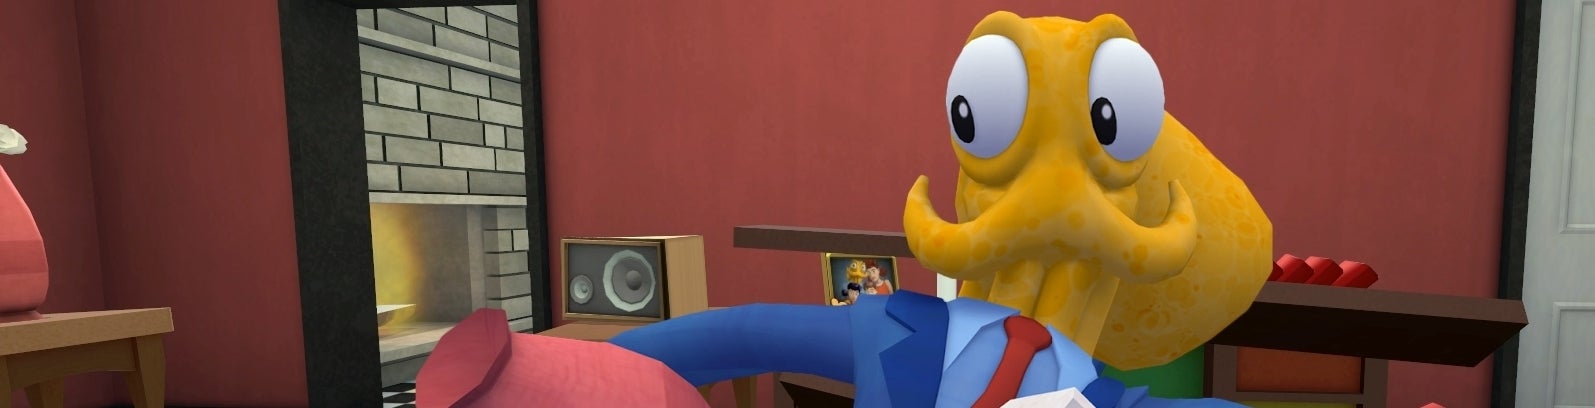 Immagine di Octodad: Dadliest Catch - review